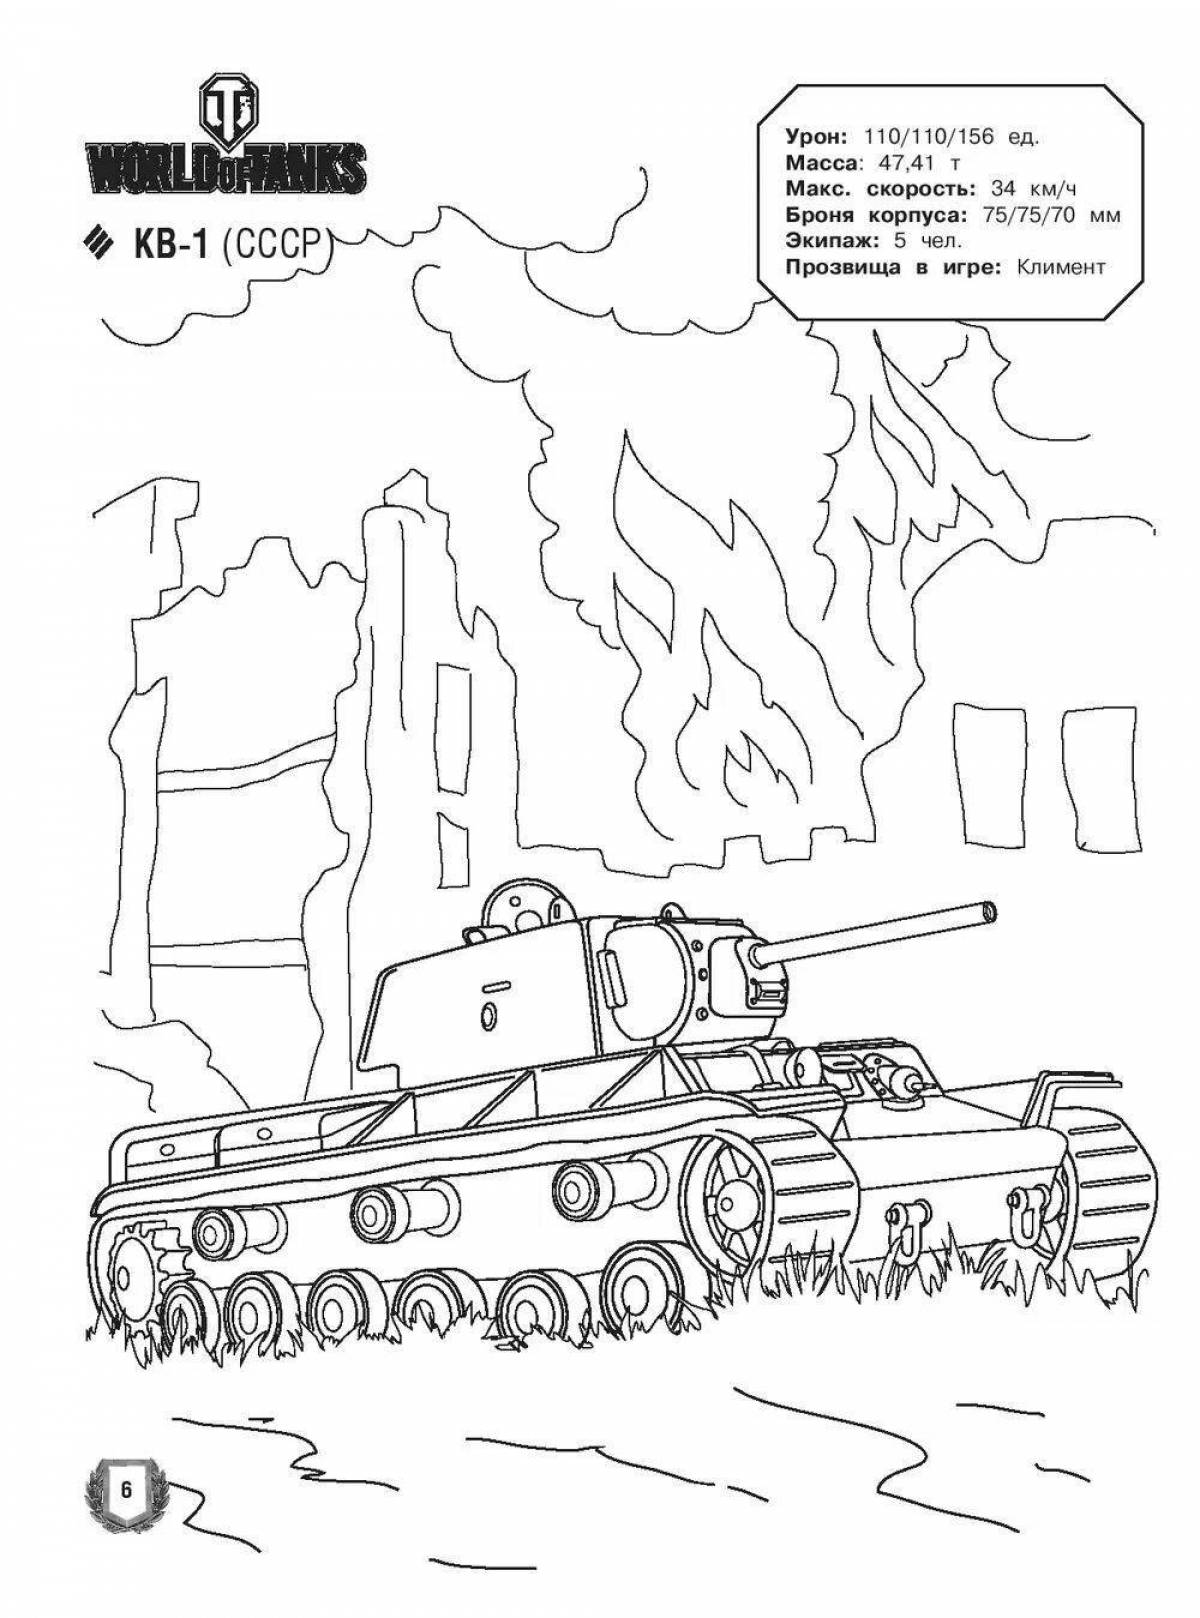 Kv1 radiant tank coloring page